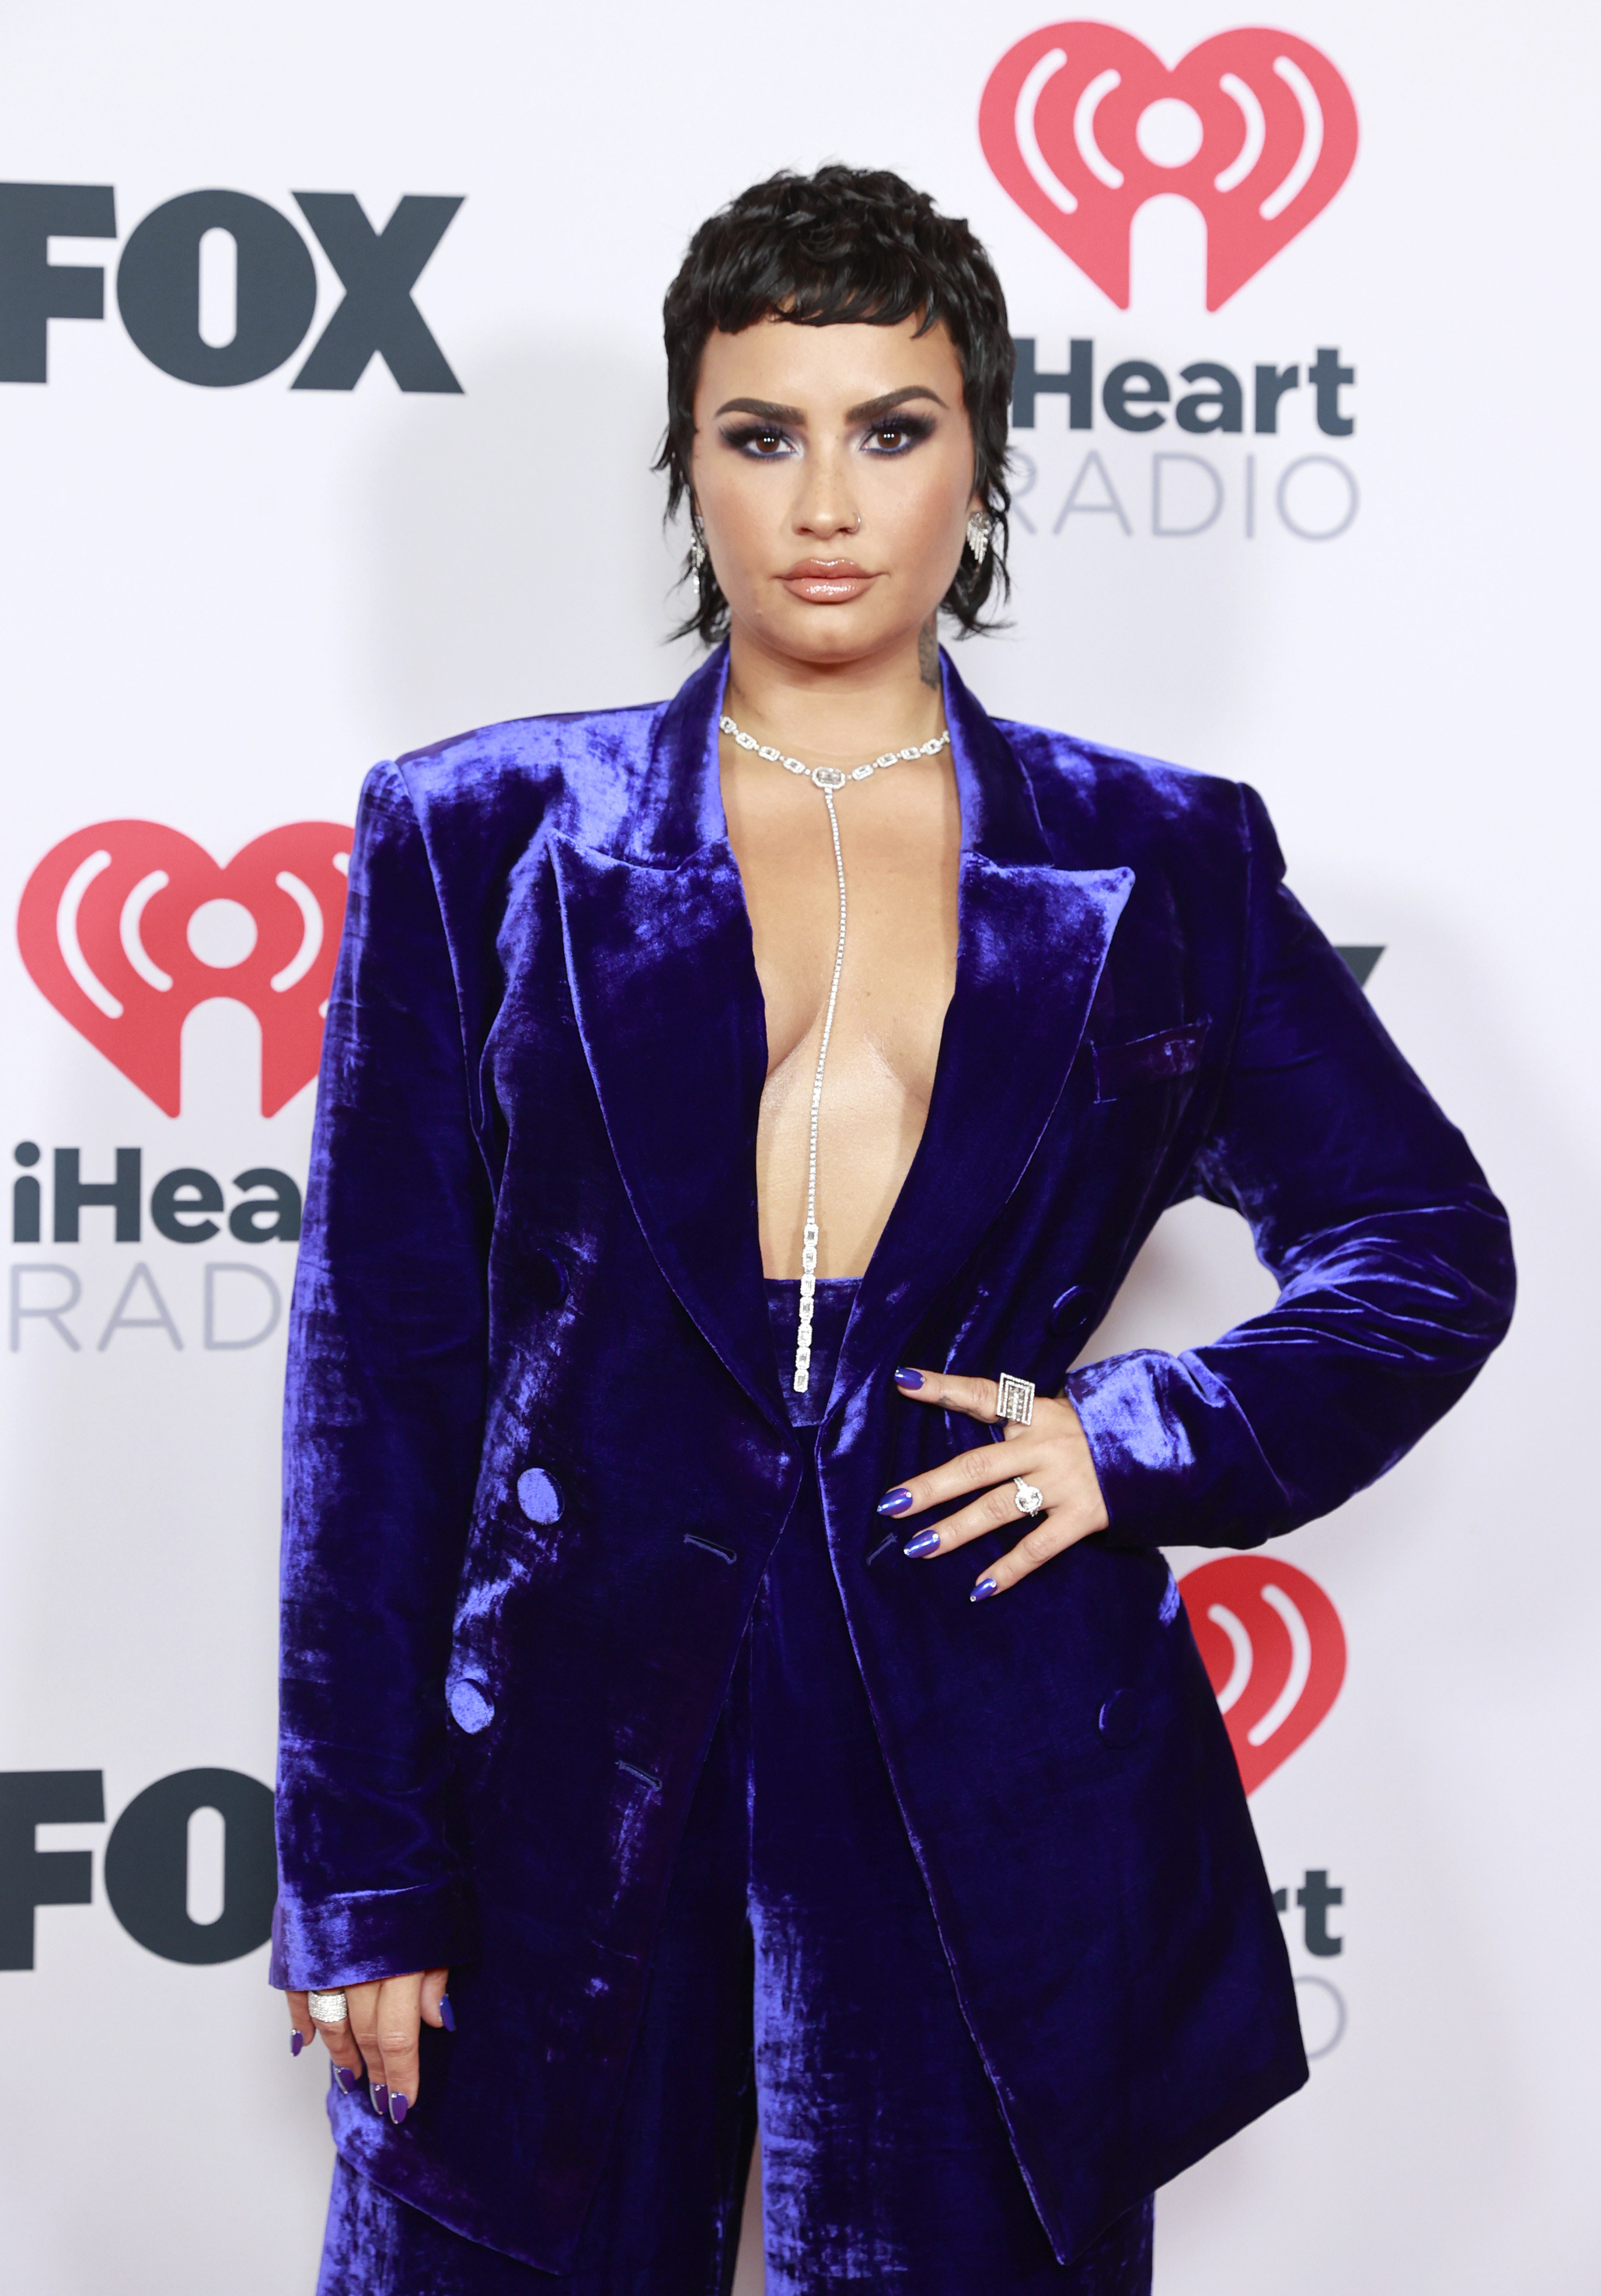 Demi wears a purple velvet blazer while showing off a new mullet hairstyle